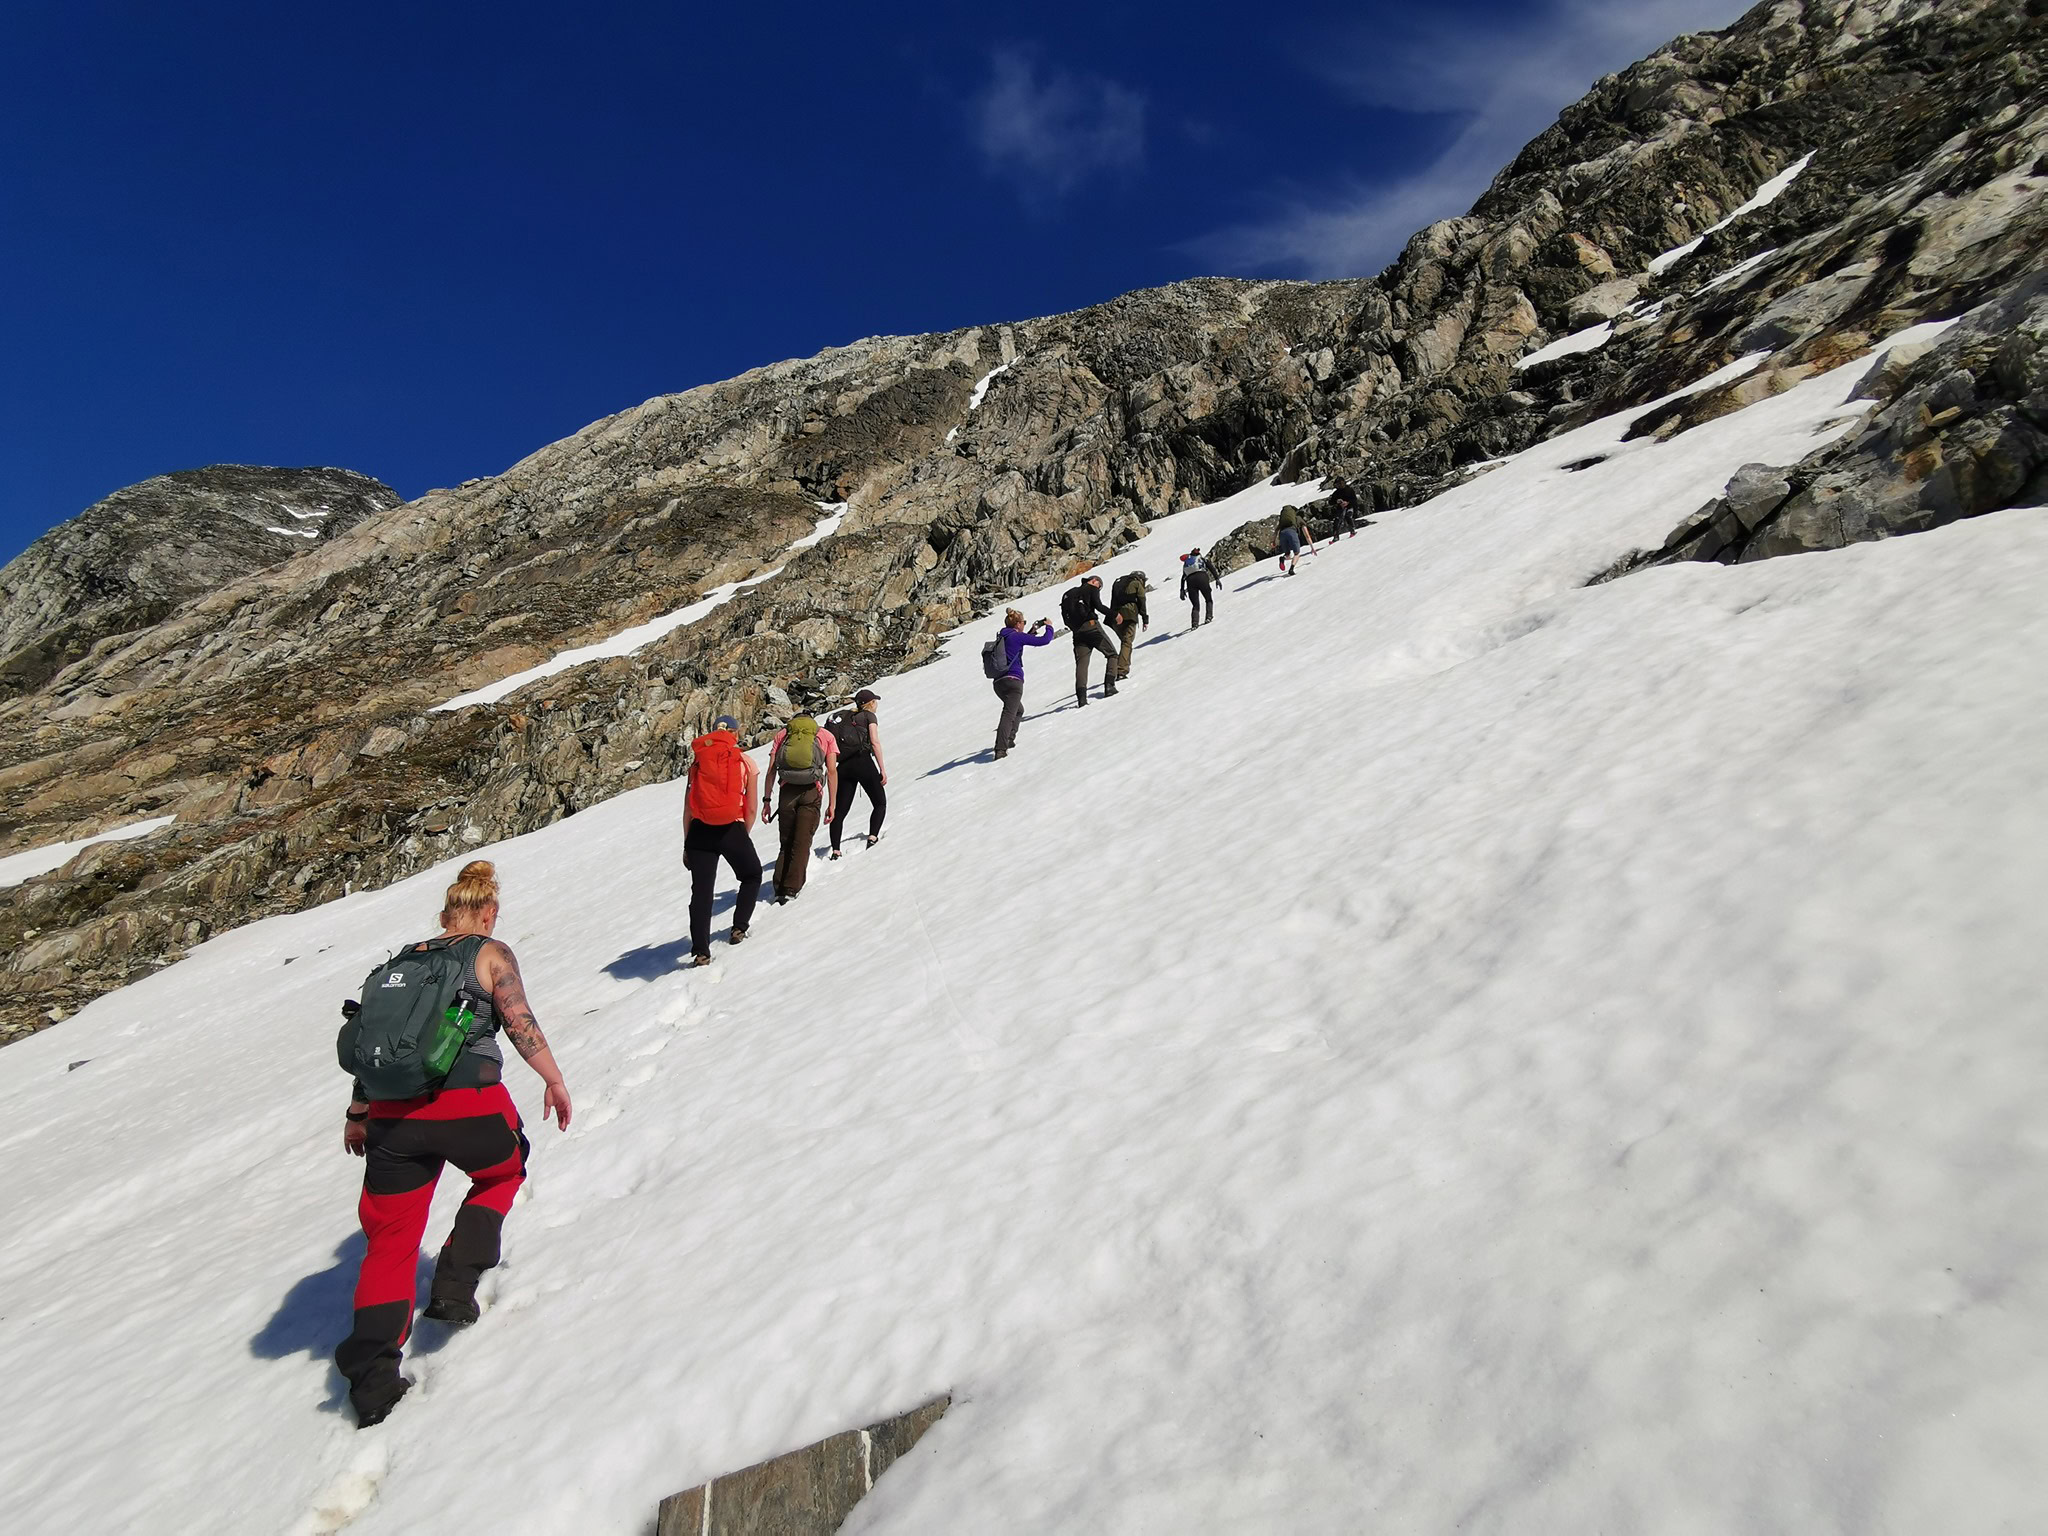 Mountaineering in the snow - Tip Top Tours photo archive